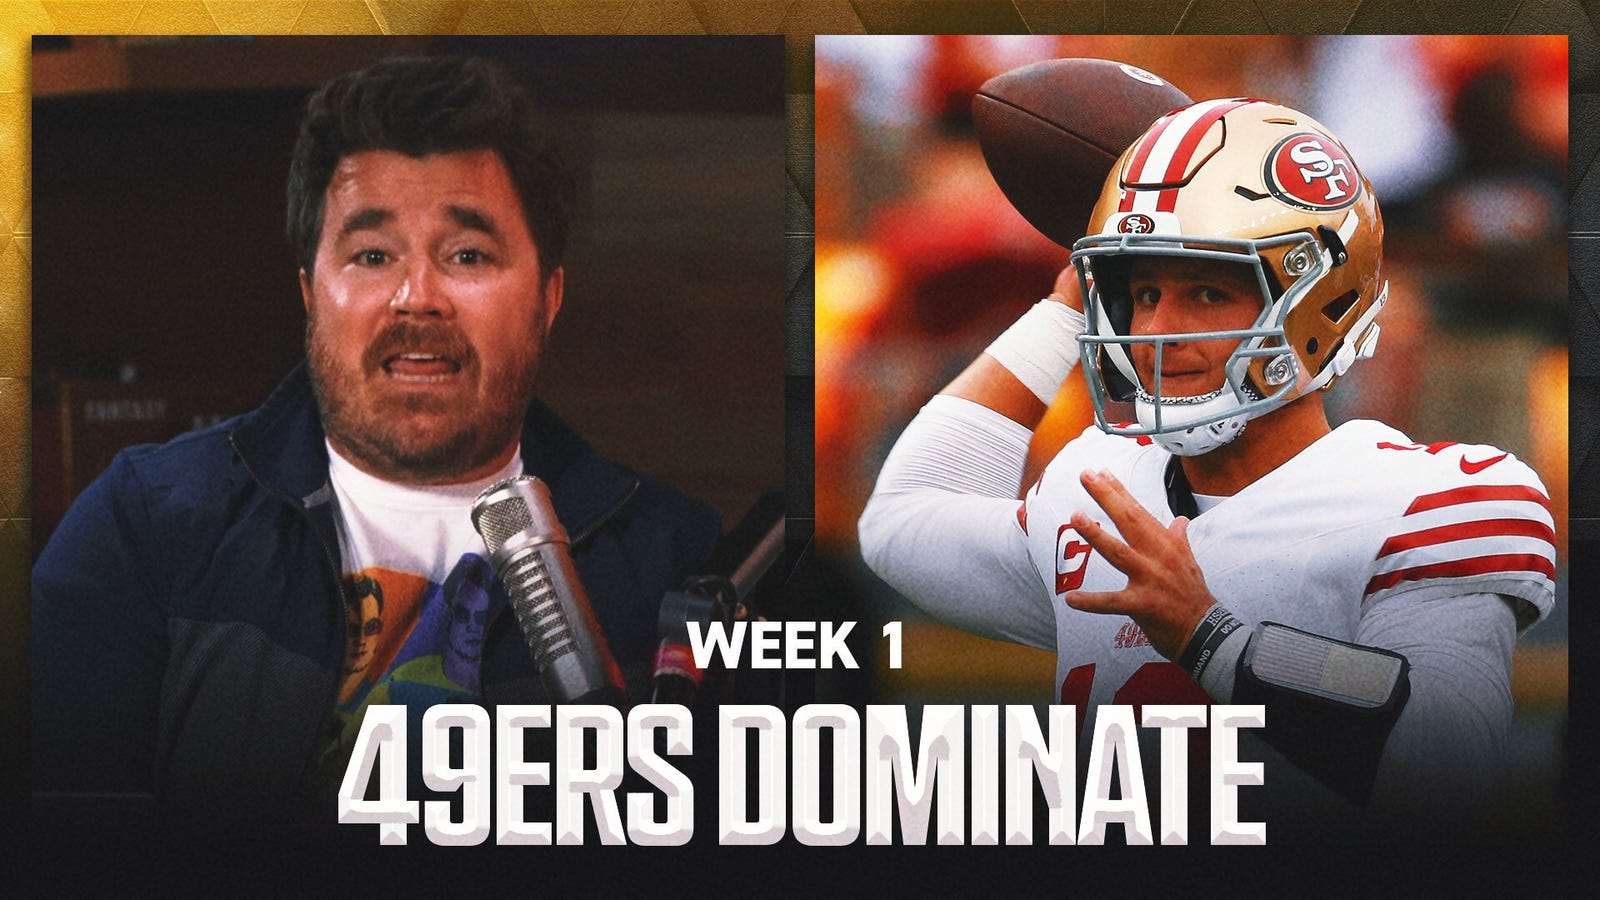 Dave Helman reacts to Brock Purdy, 49ers' DOMINANT victory over Steelers